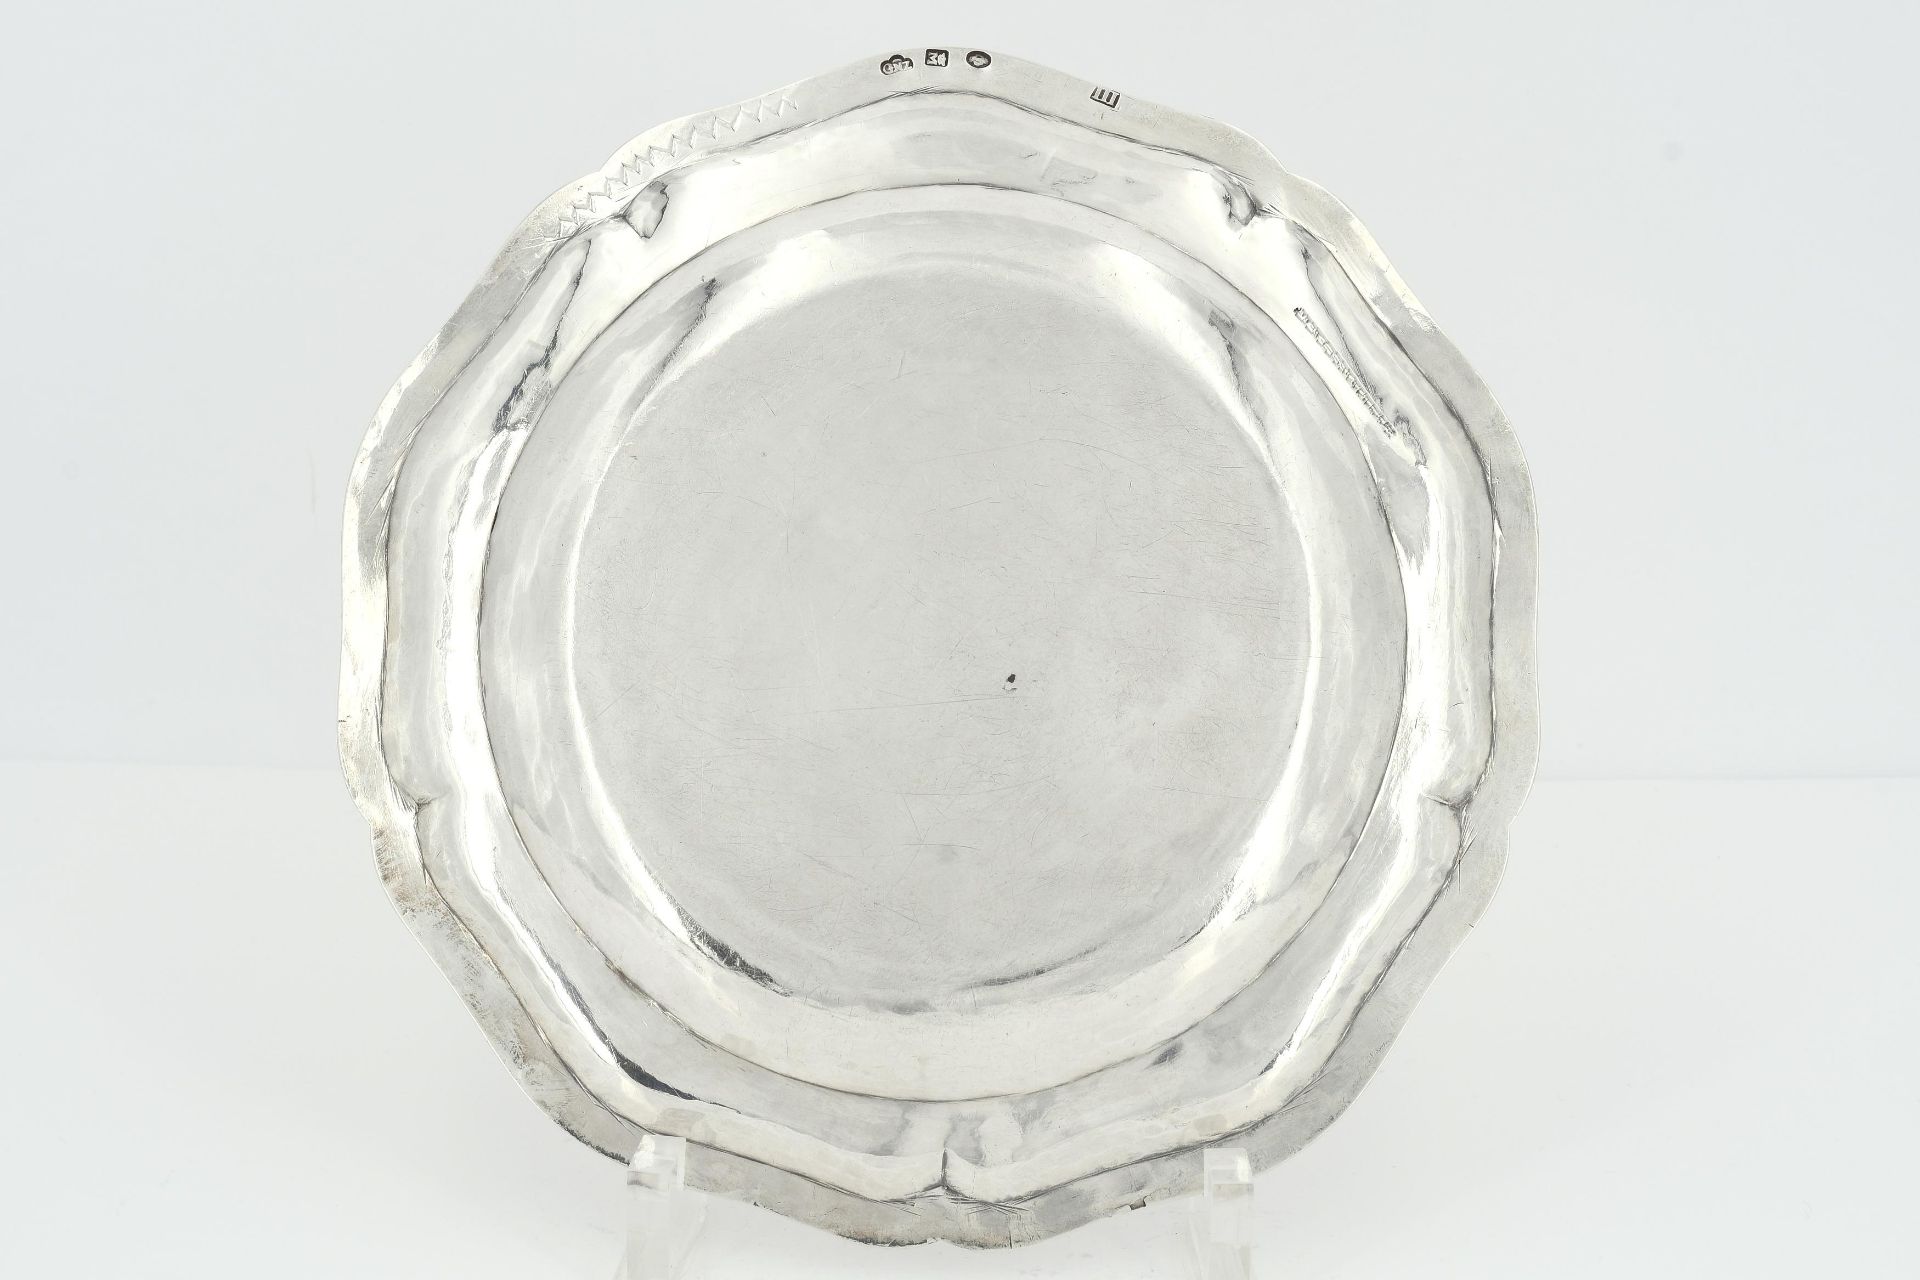 Silver plate with the Lippe rose - Image 3 of 3